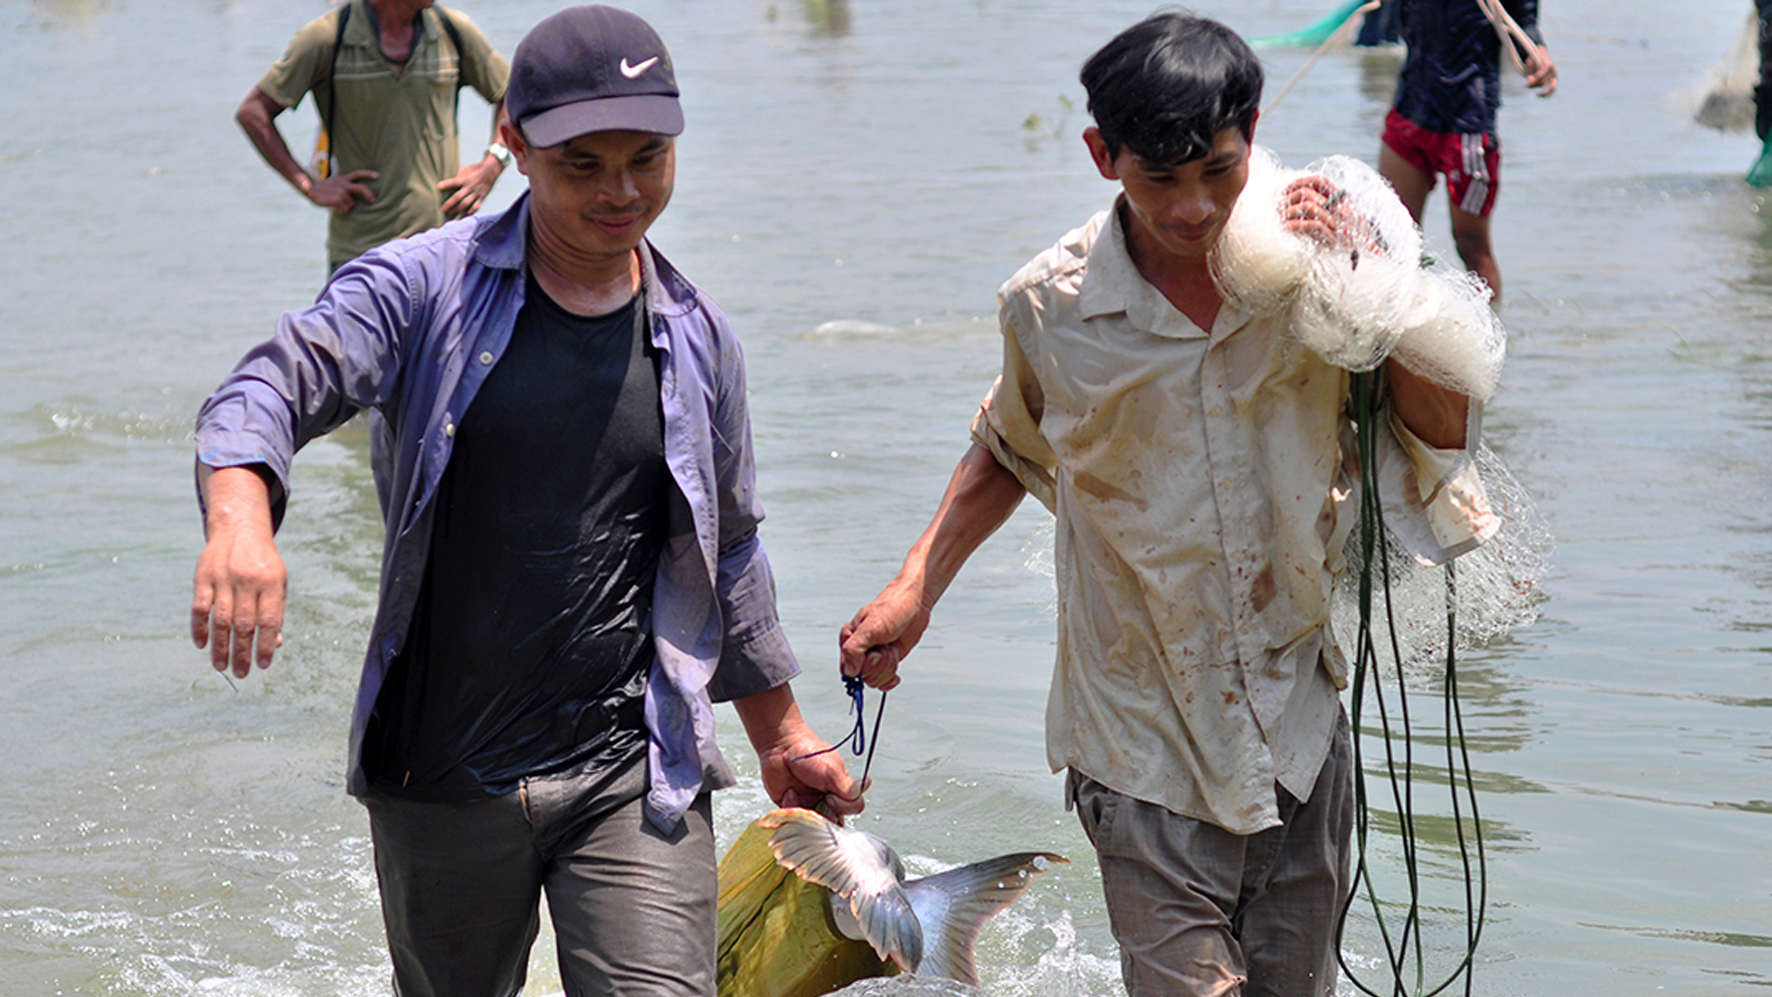 Two men manage to catch a big fish.